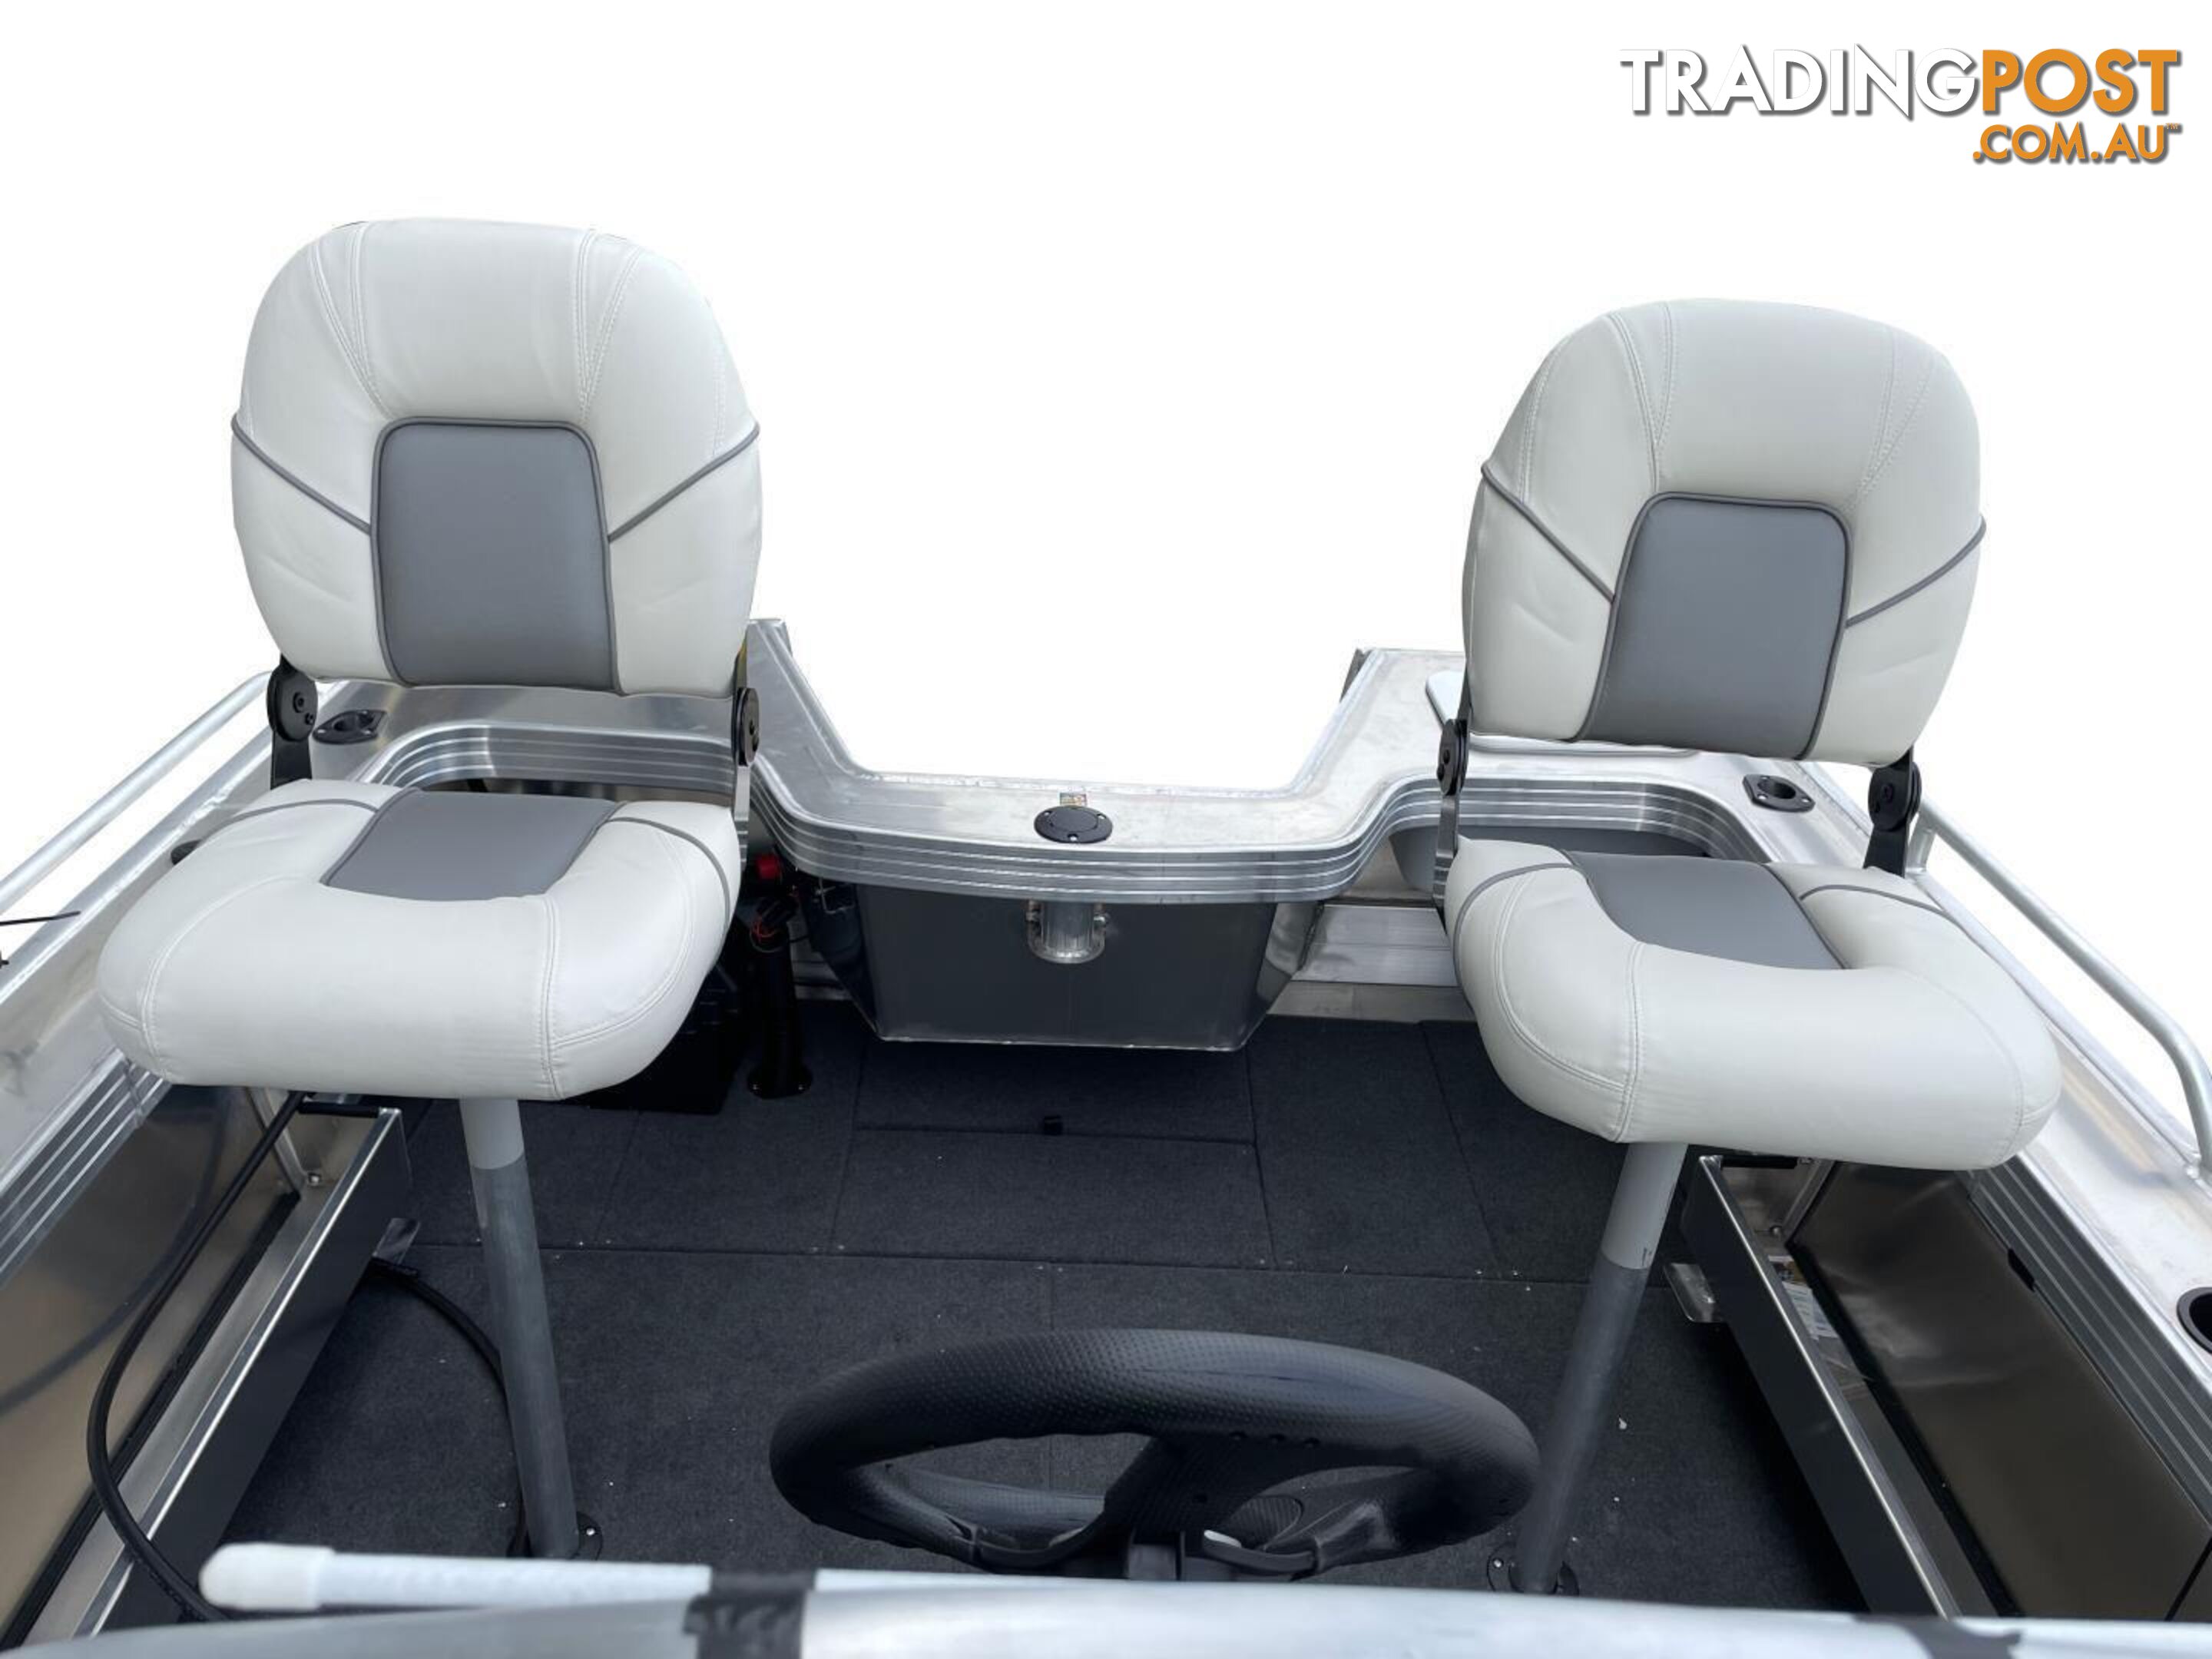 Quintrex 570 Renegade CC(Centre Console) + Yamaha F115hp 4-Stroke - Pack 2 for sale online prices